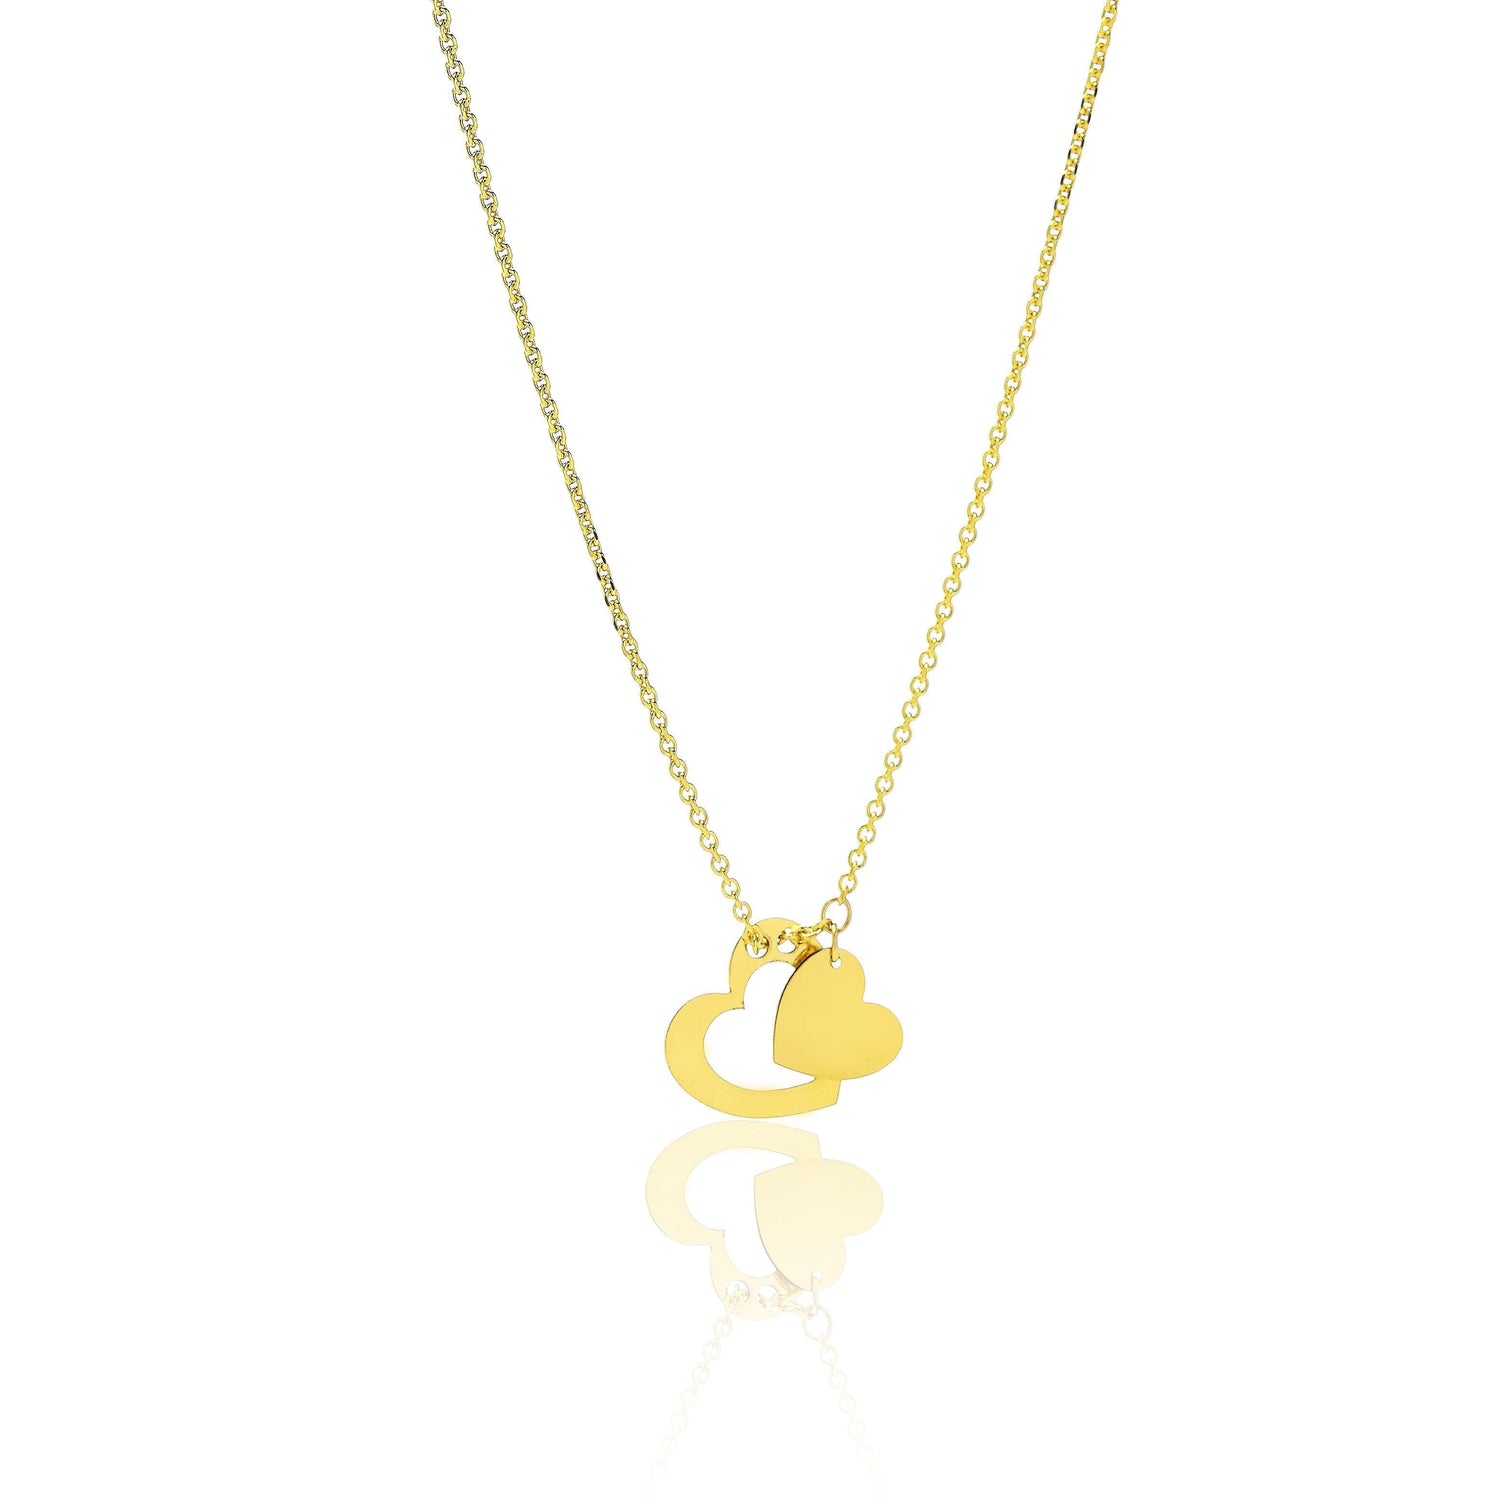 14k Yellow Gold 16 - 18 inch Extendable Double Heart Love Charm Pendant Necklace